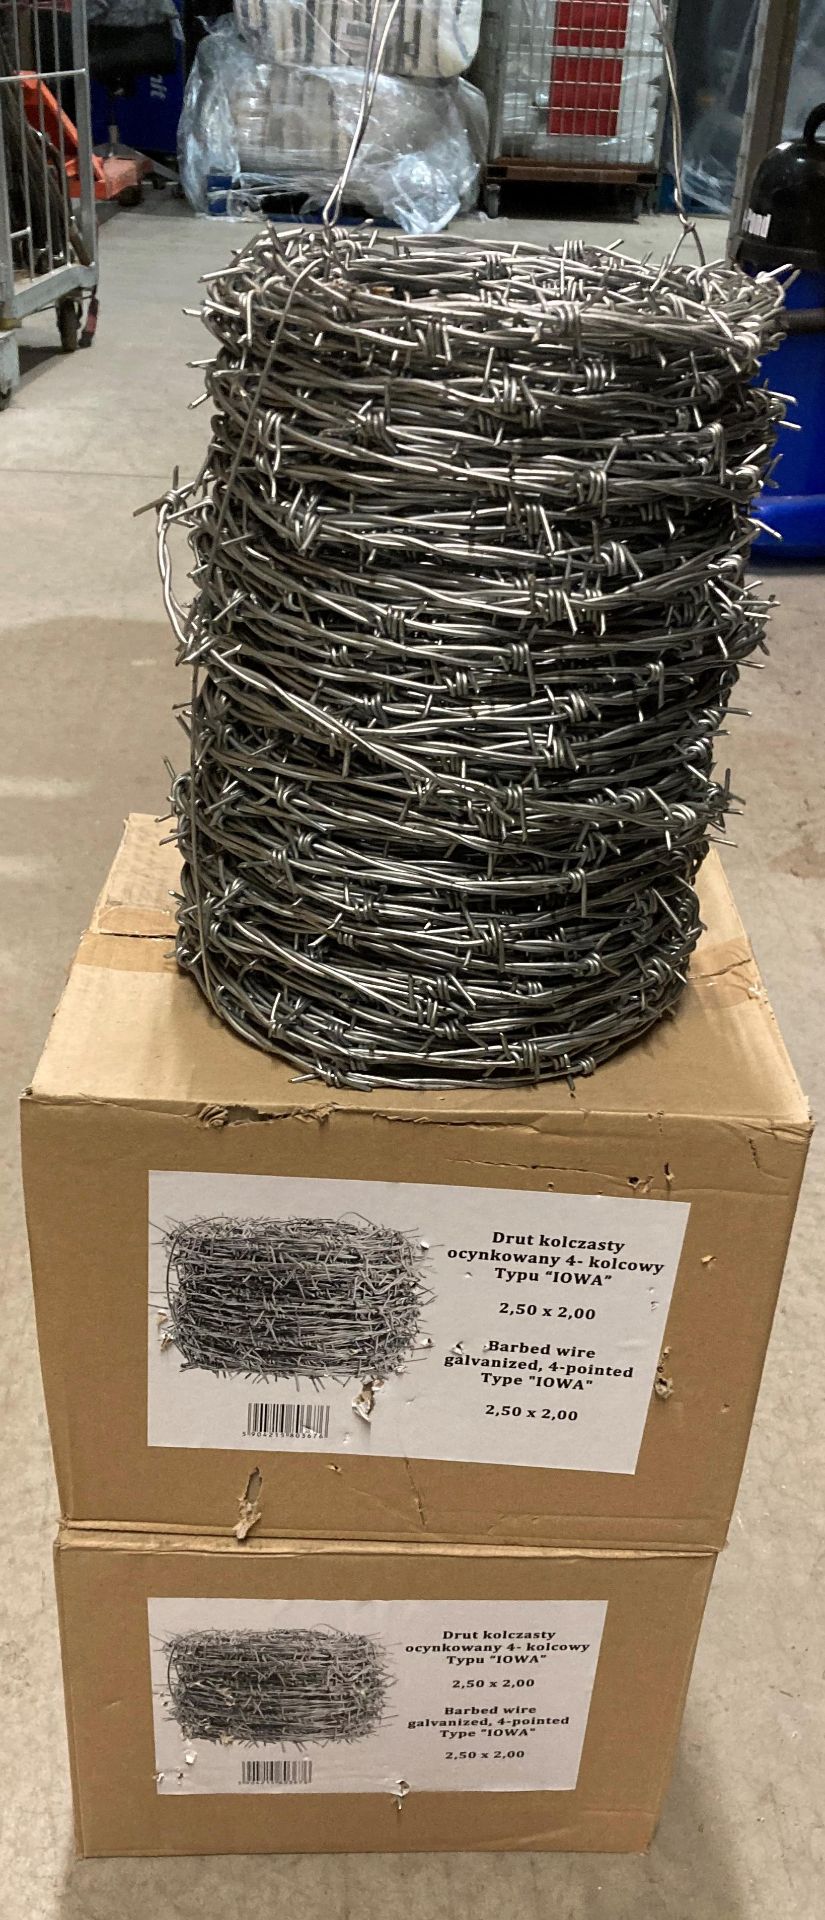 Three rolls of galvanised four pointed type "IOWA" barbed wire 2,50 x 2,